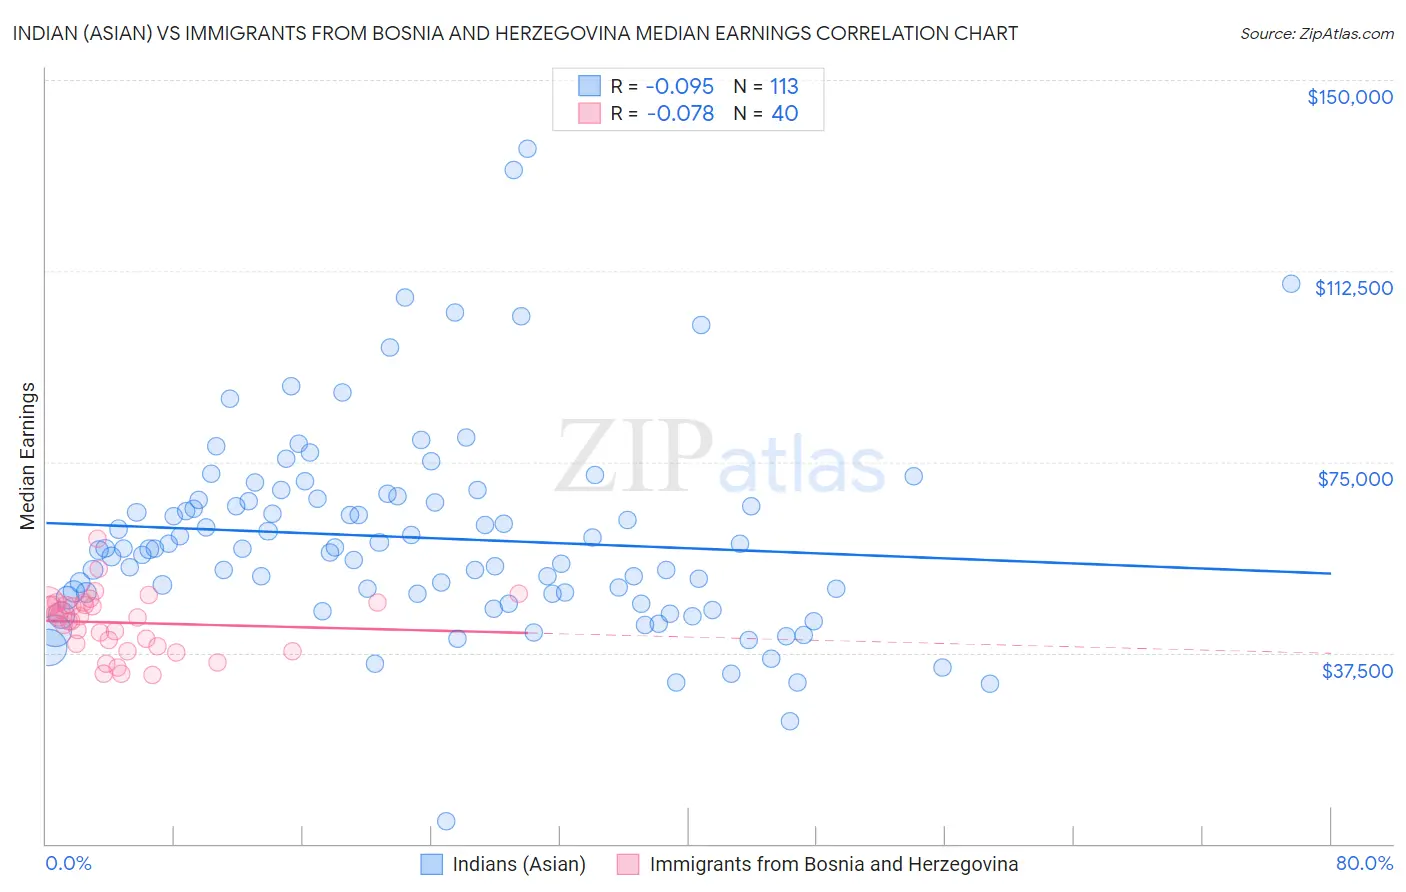 Indian (Asian) vs Immigrants from Bosnia and Herzegovina Median Earnings